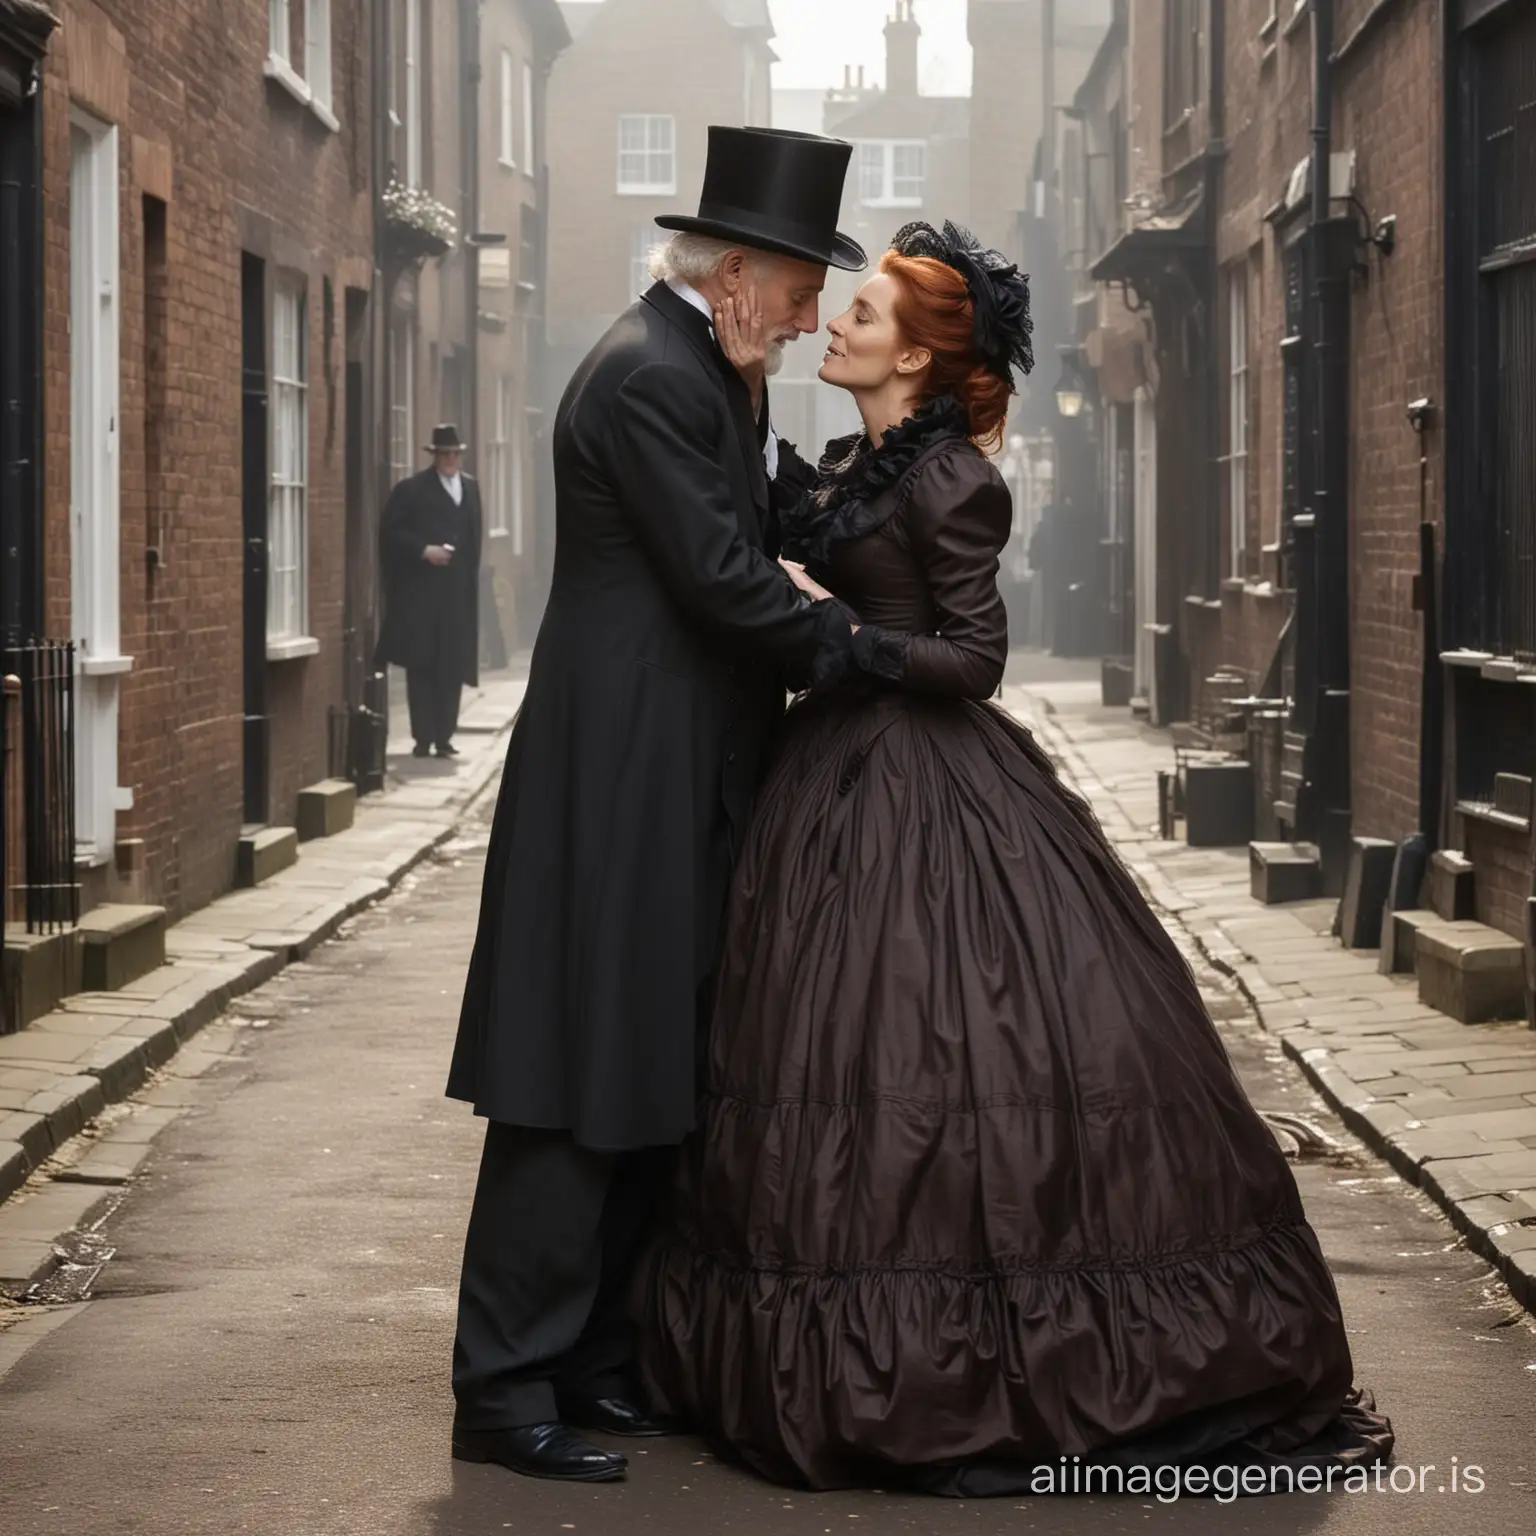 Victorian-Romance-RedHaired-Woman-Embracing-Husband-on-Historical-Street